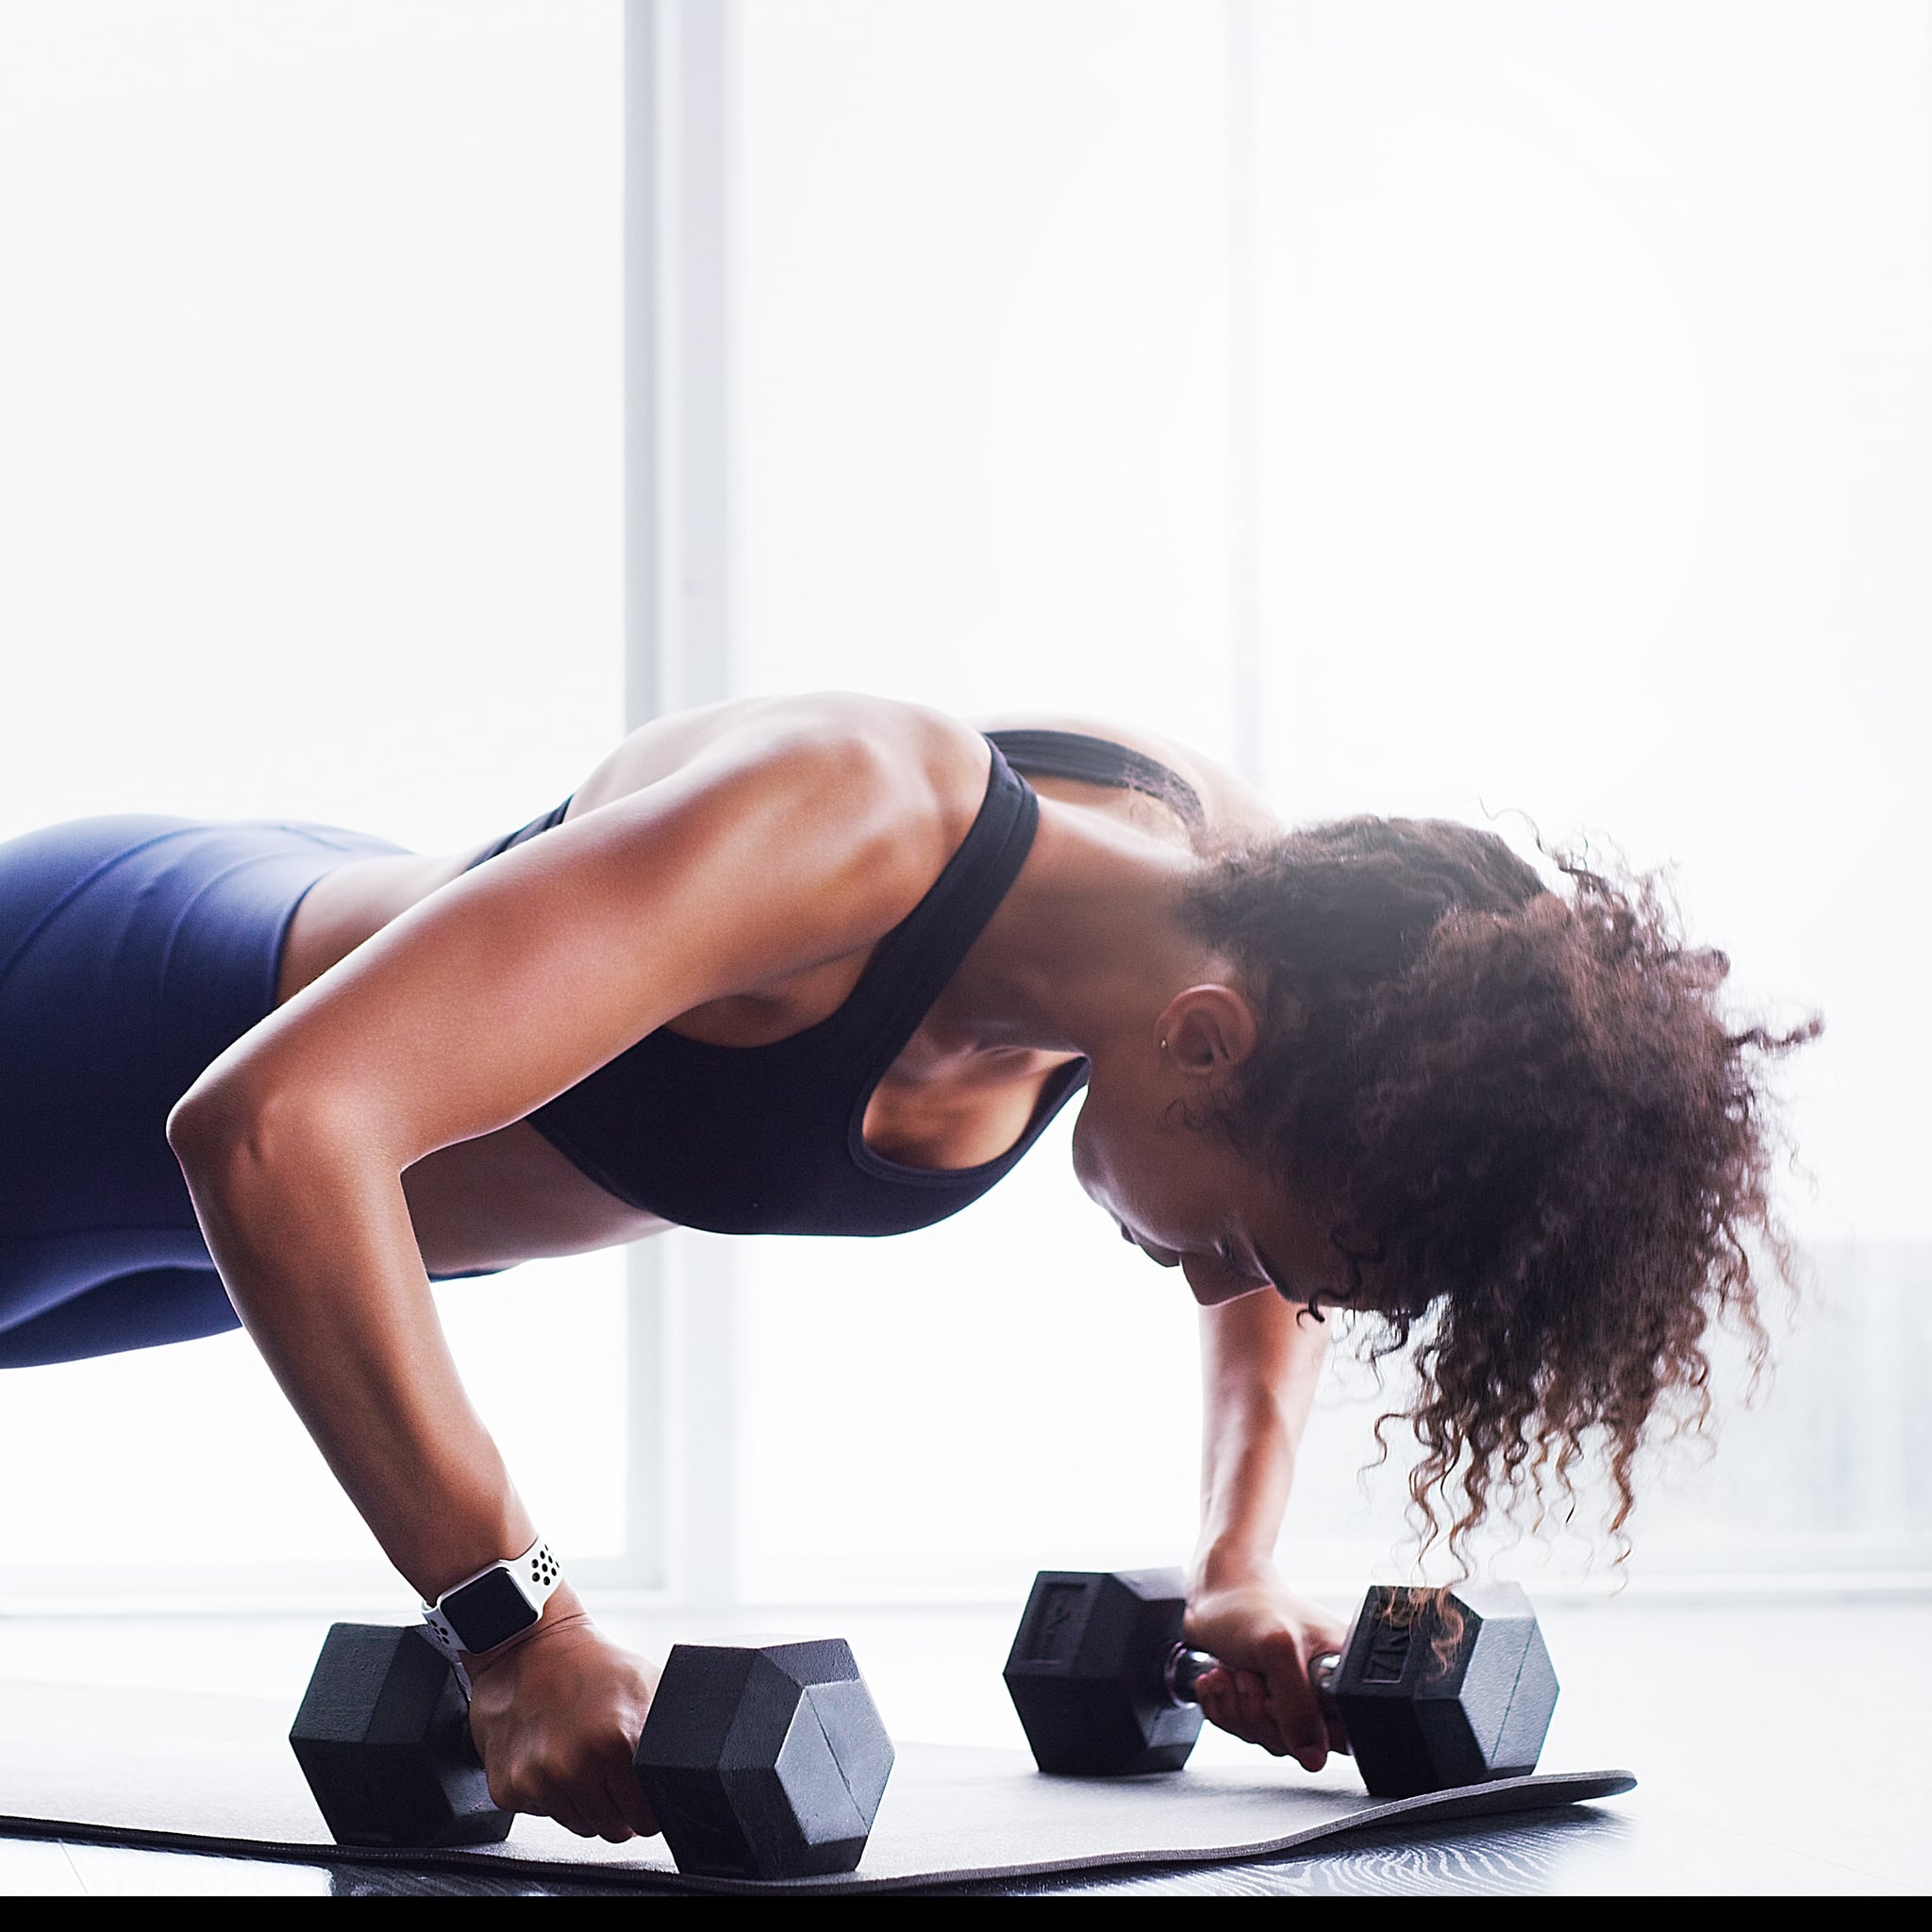 Warmup Exercise 3: Jumping Jack, For a Major Muscle-Building Challenge,  Try This 45-Minute Dumbbell HIIT Workout